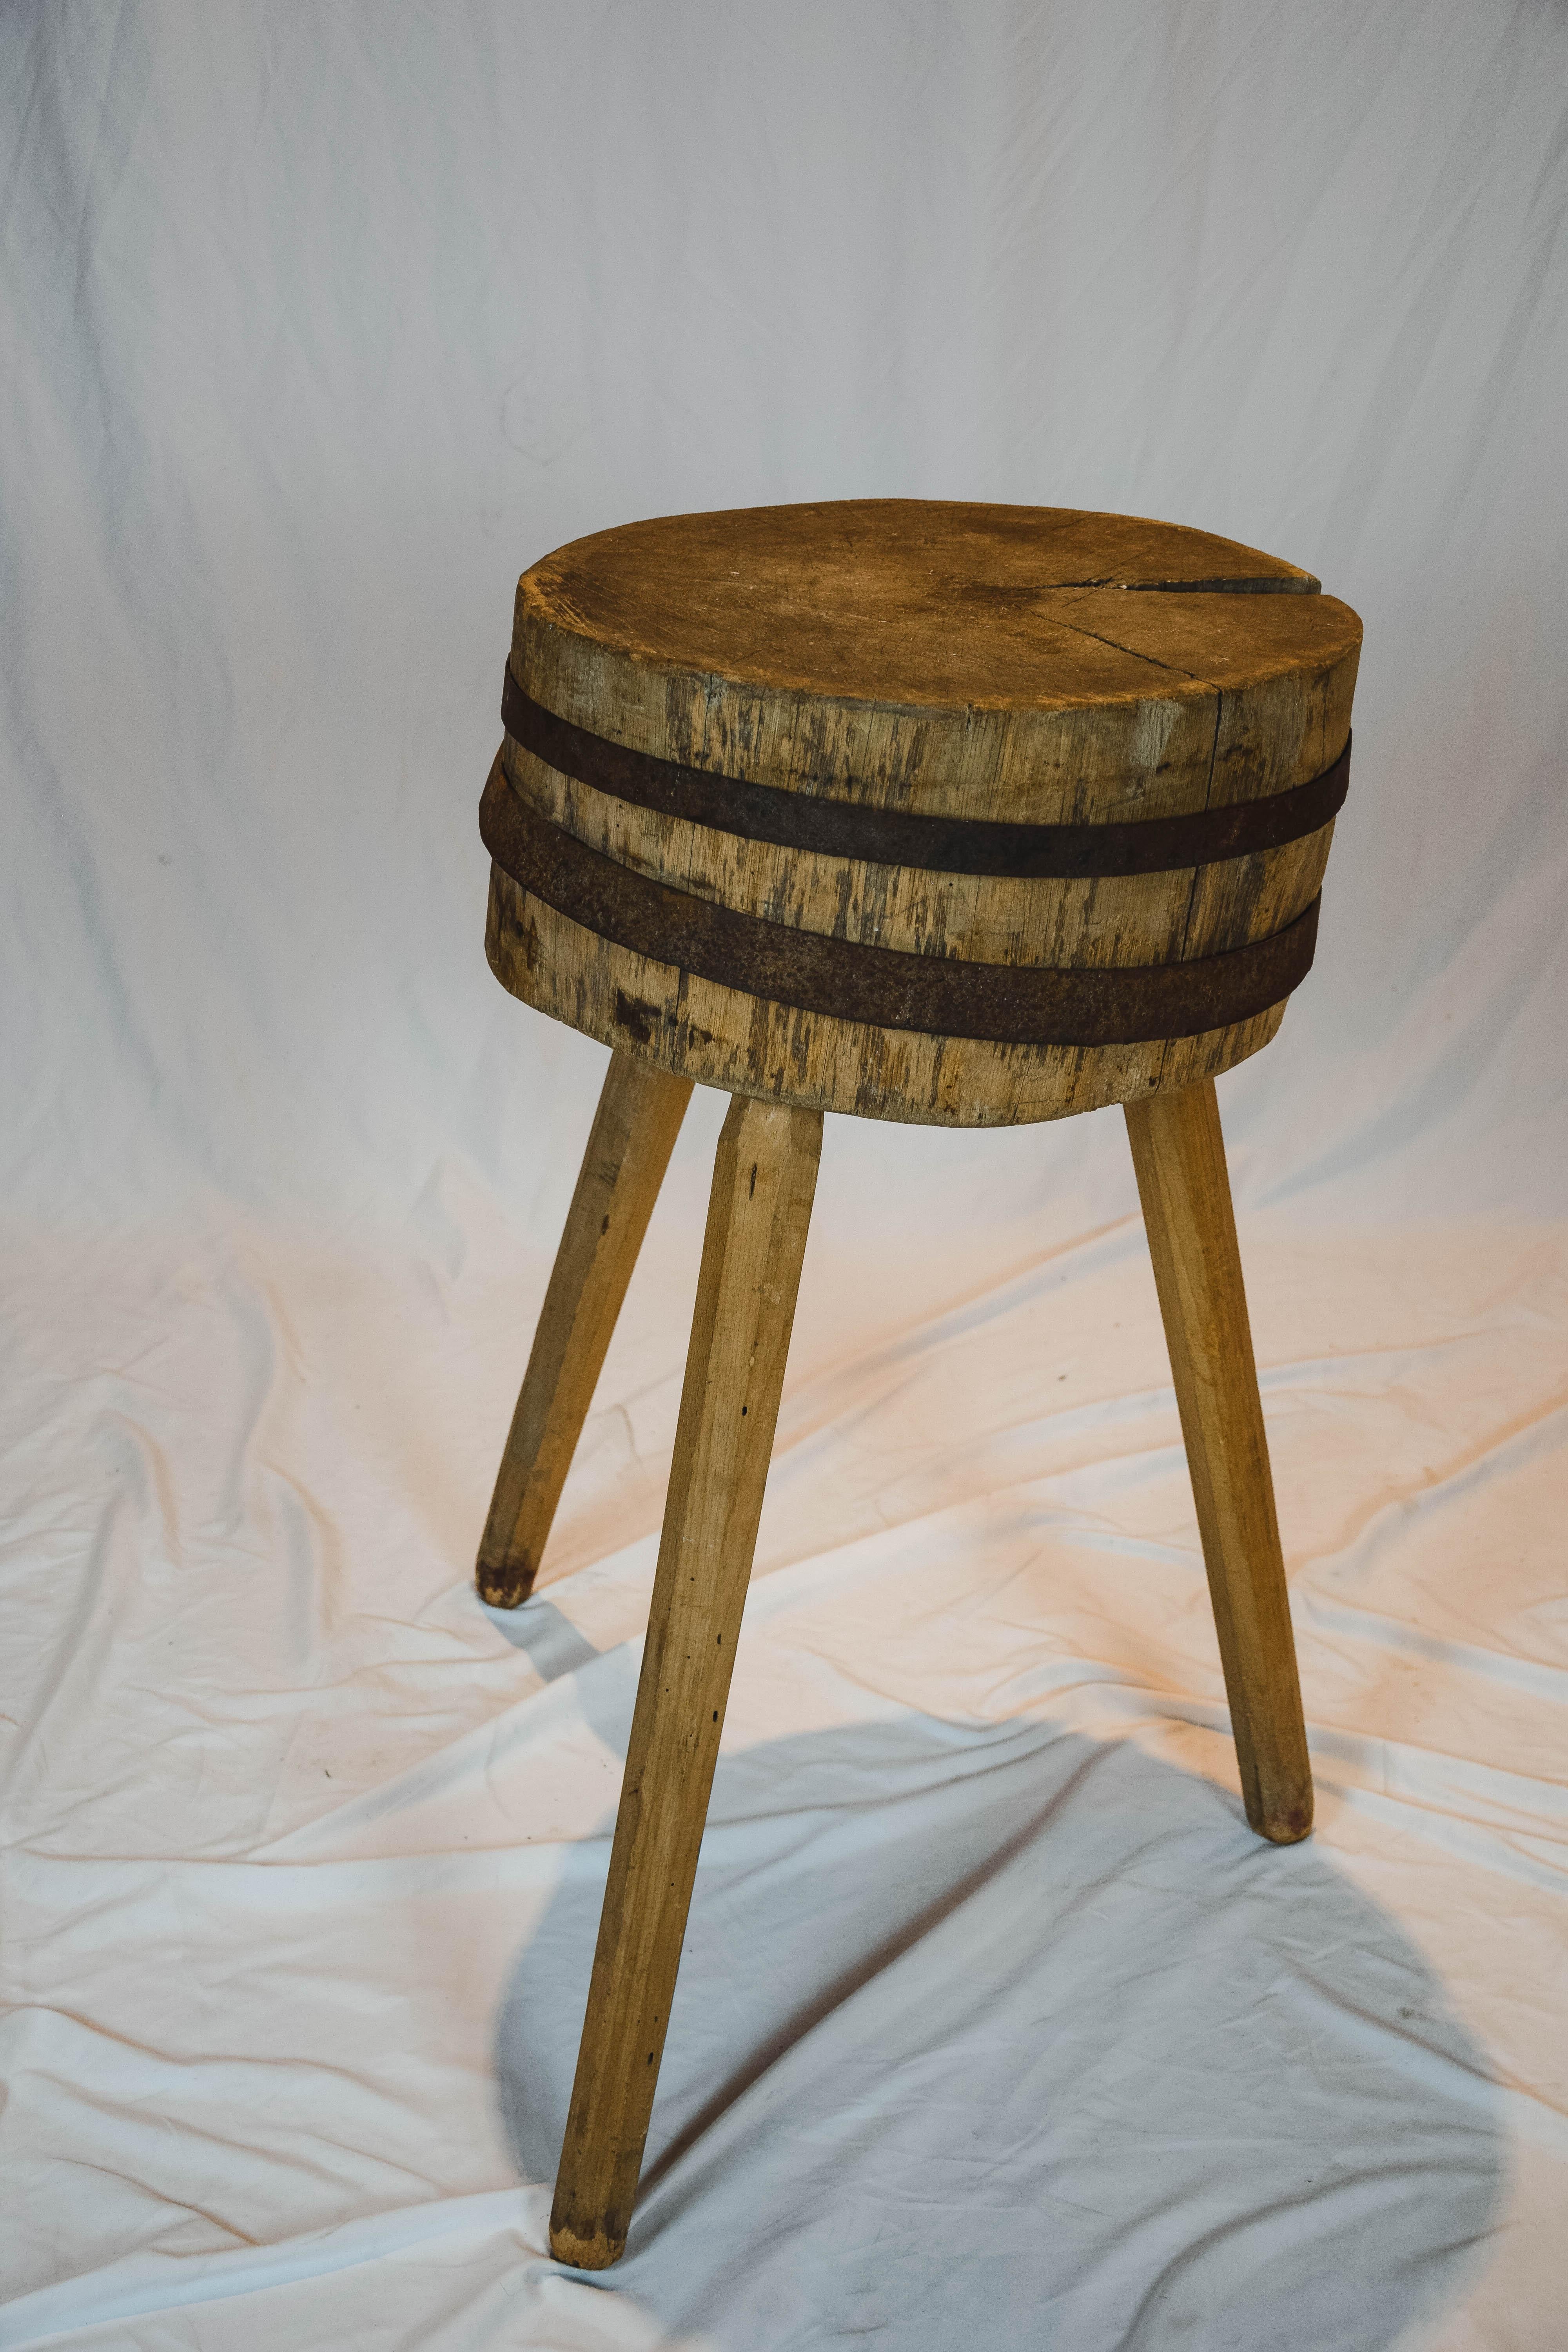 19th Century Simple Wooden Block Table